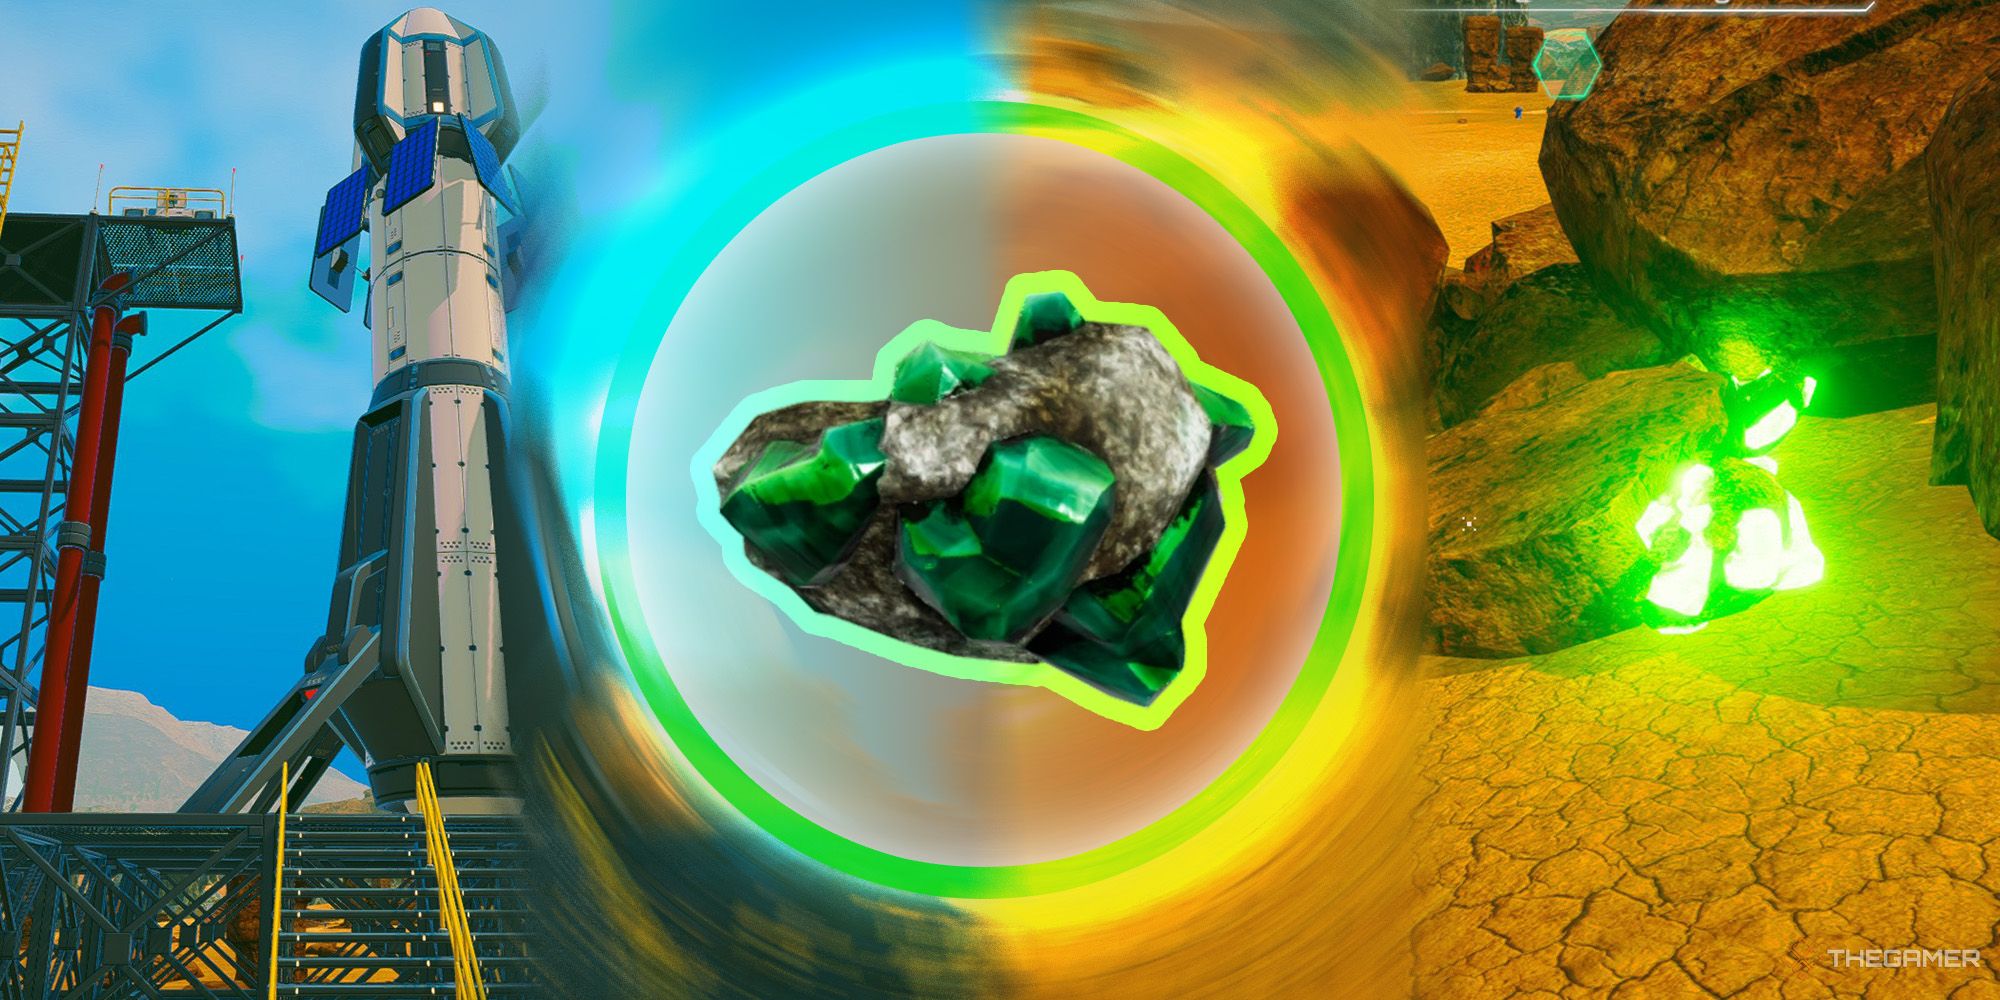 The Planet Crafter - Uranium image in a circular shape between a launch platform and rocks